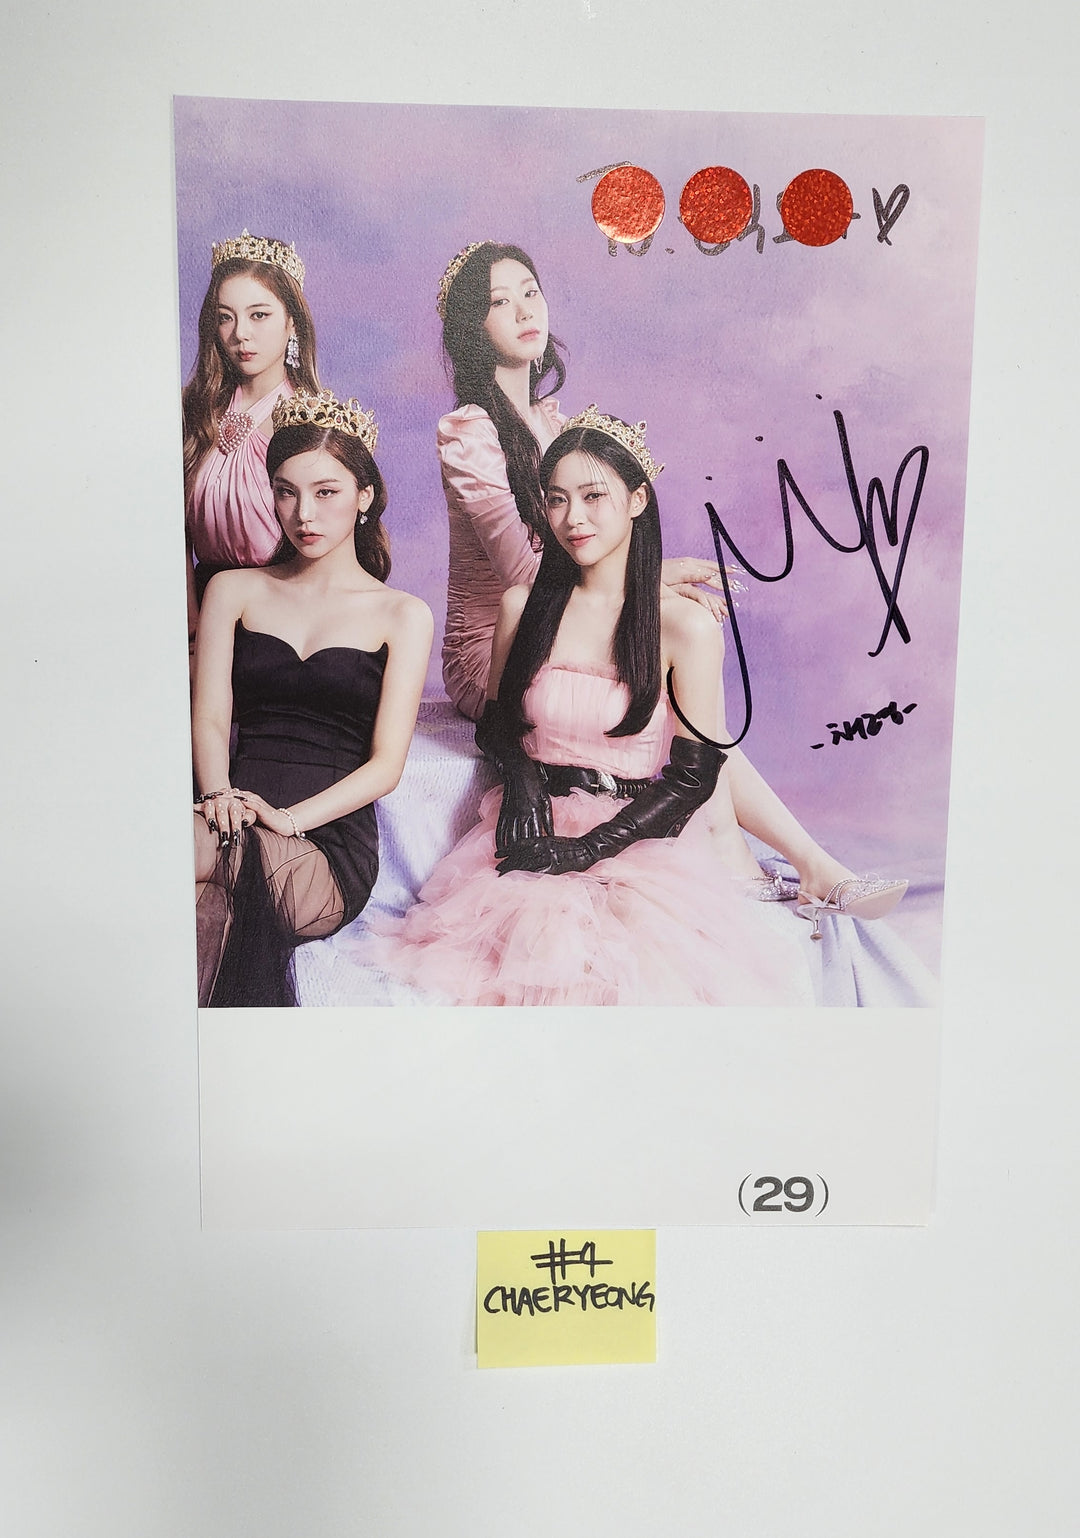 ITZY "CHECKMATE" - A Cut Page From Fansign Event Album